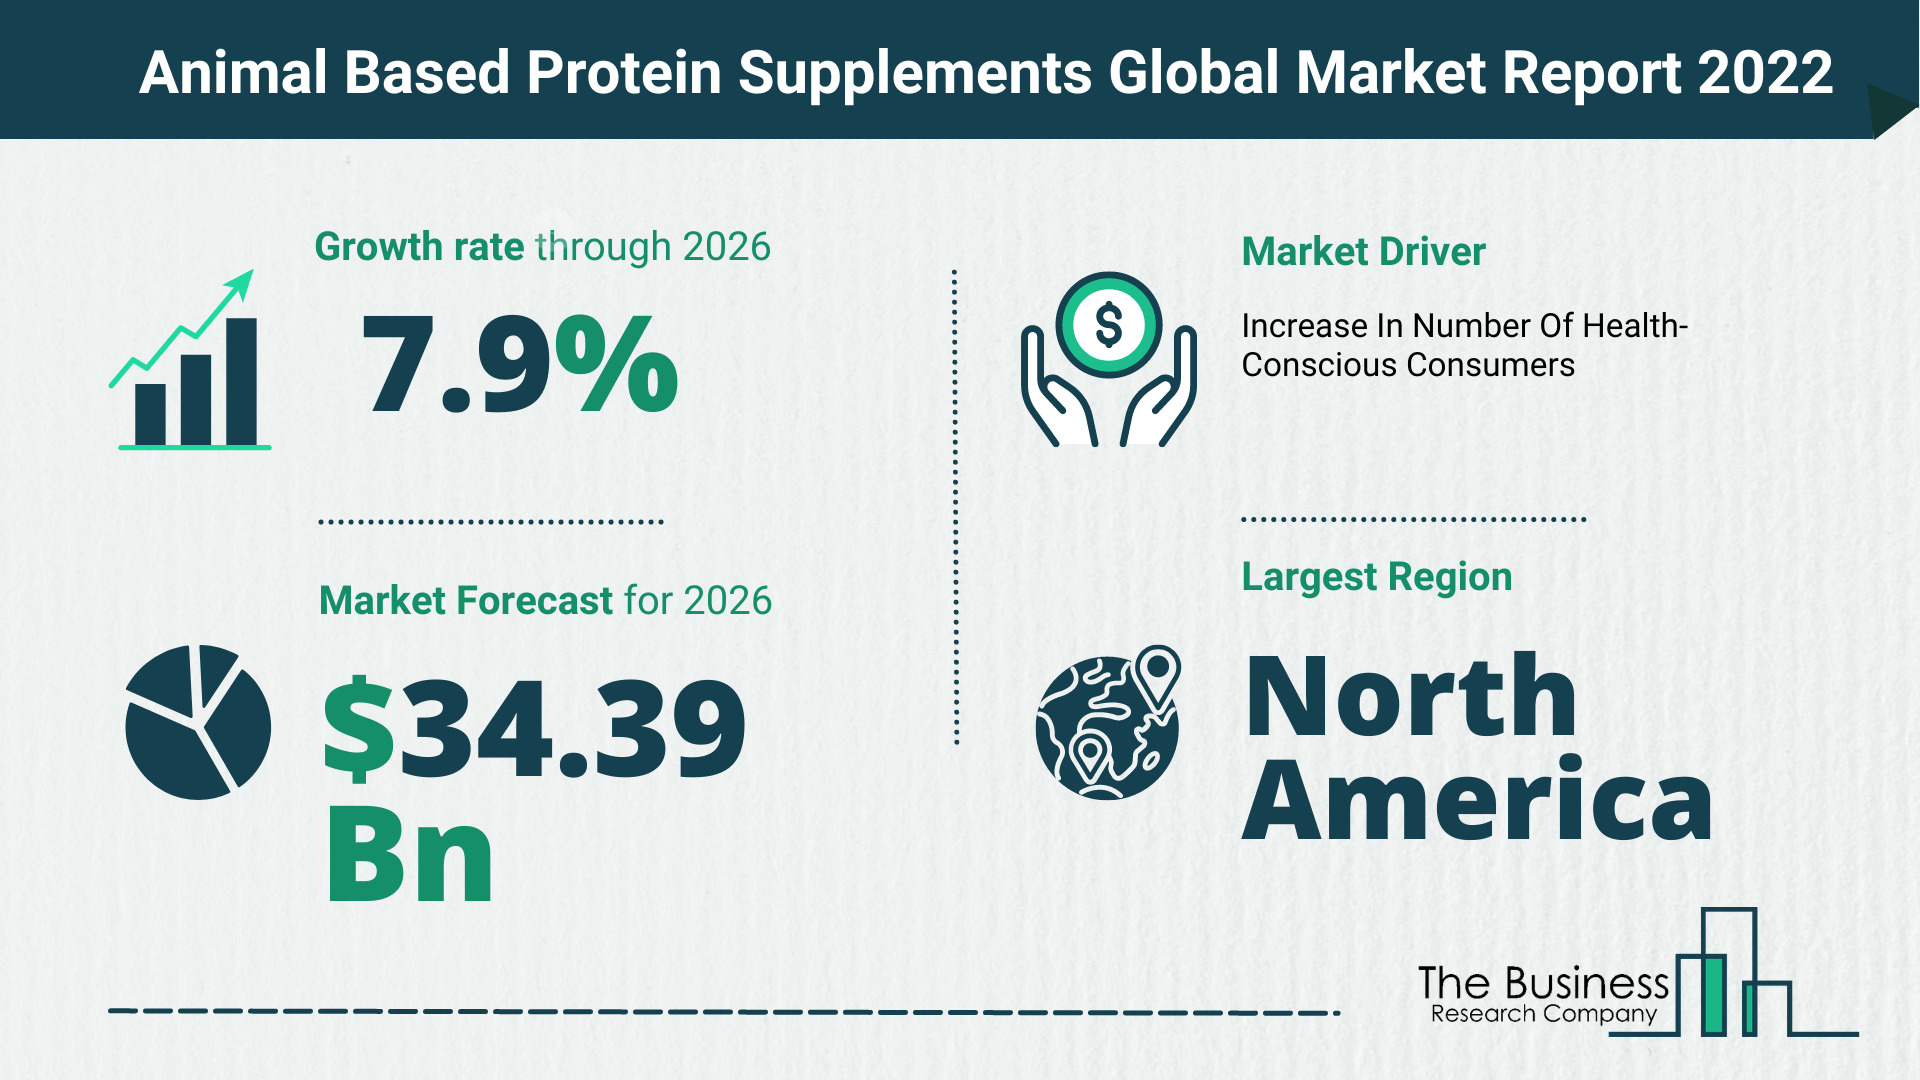 Global Animal Based Protein Supplements Market 2022 – Market Opportunities And Strategies